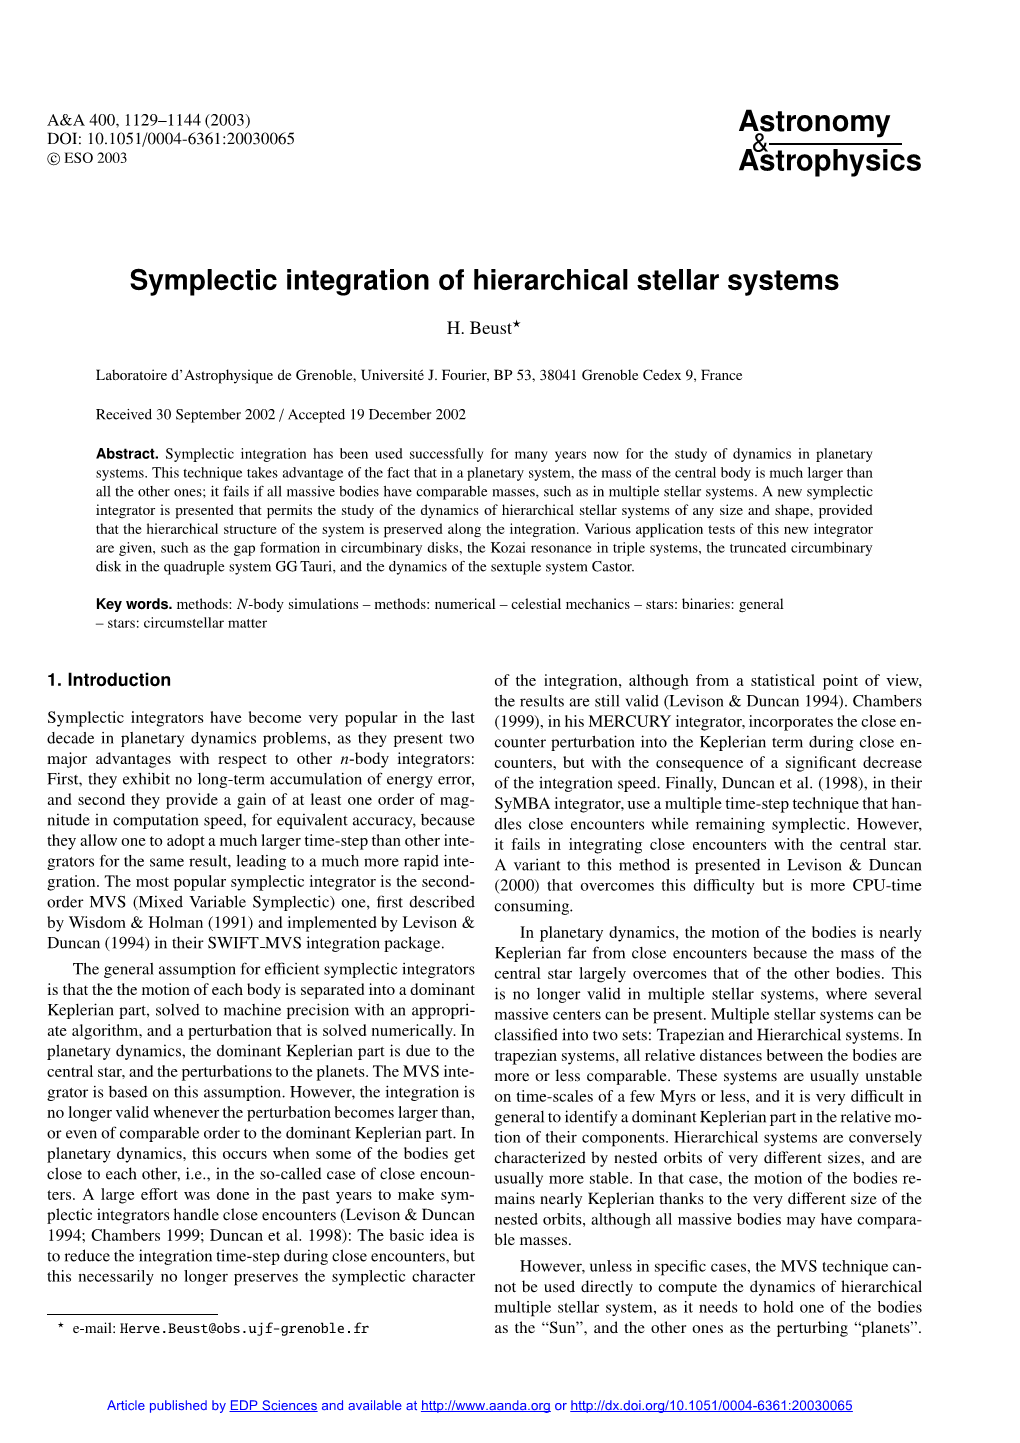 Symplectic Integration of Hierarchical Stellar Systems